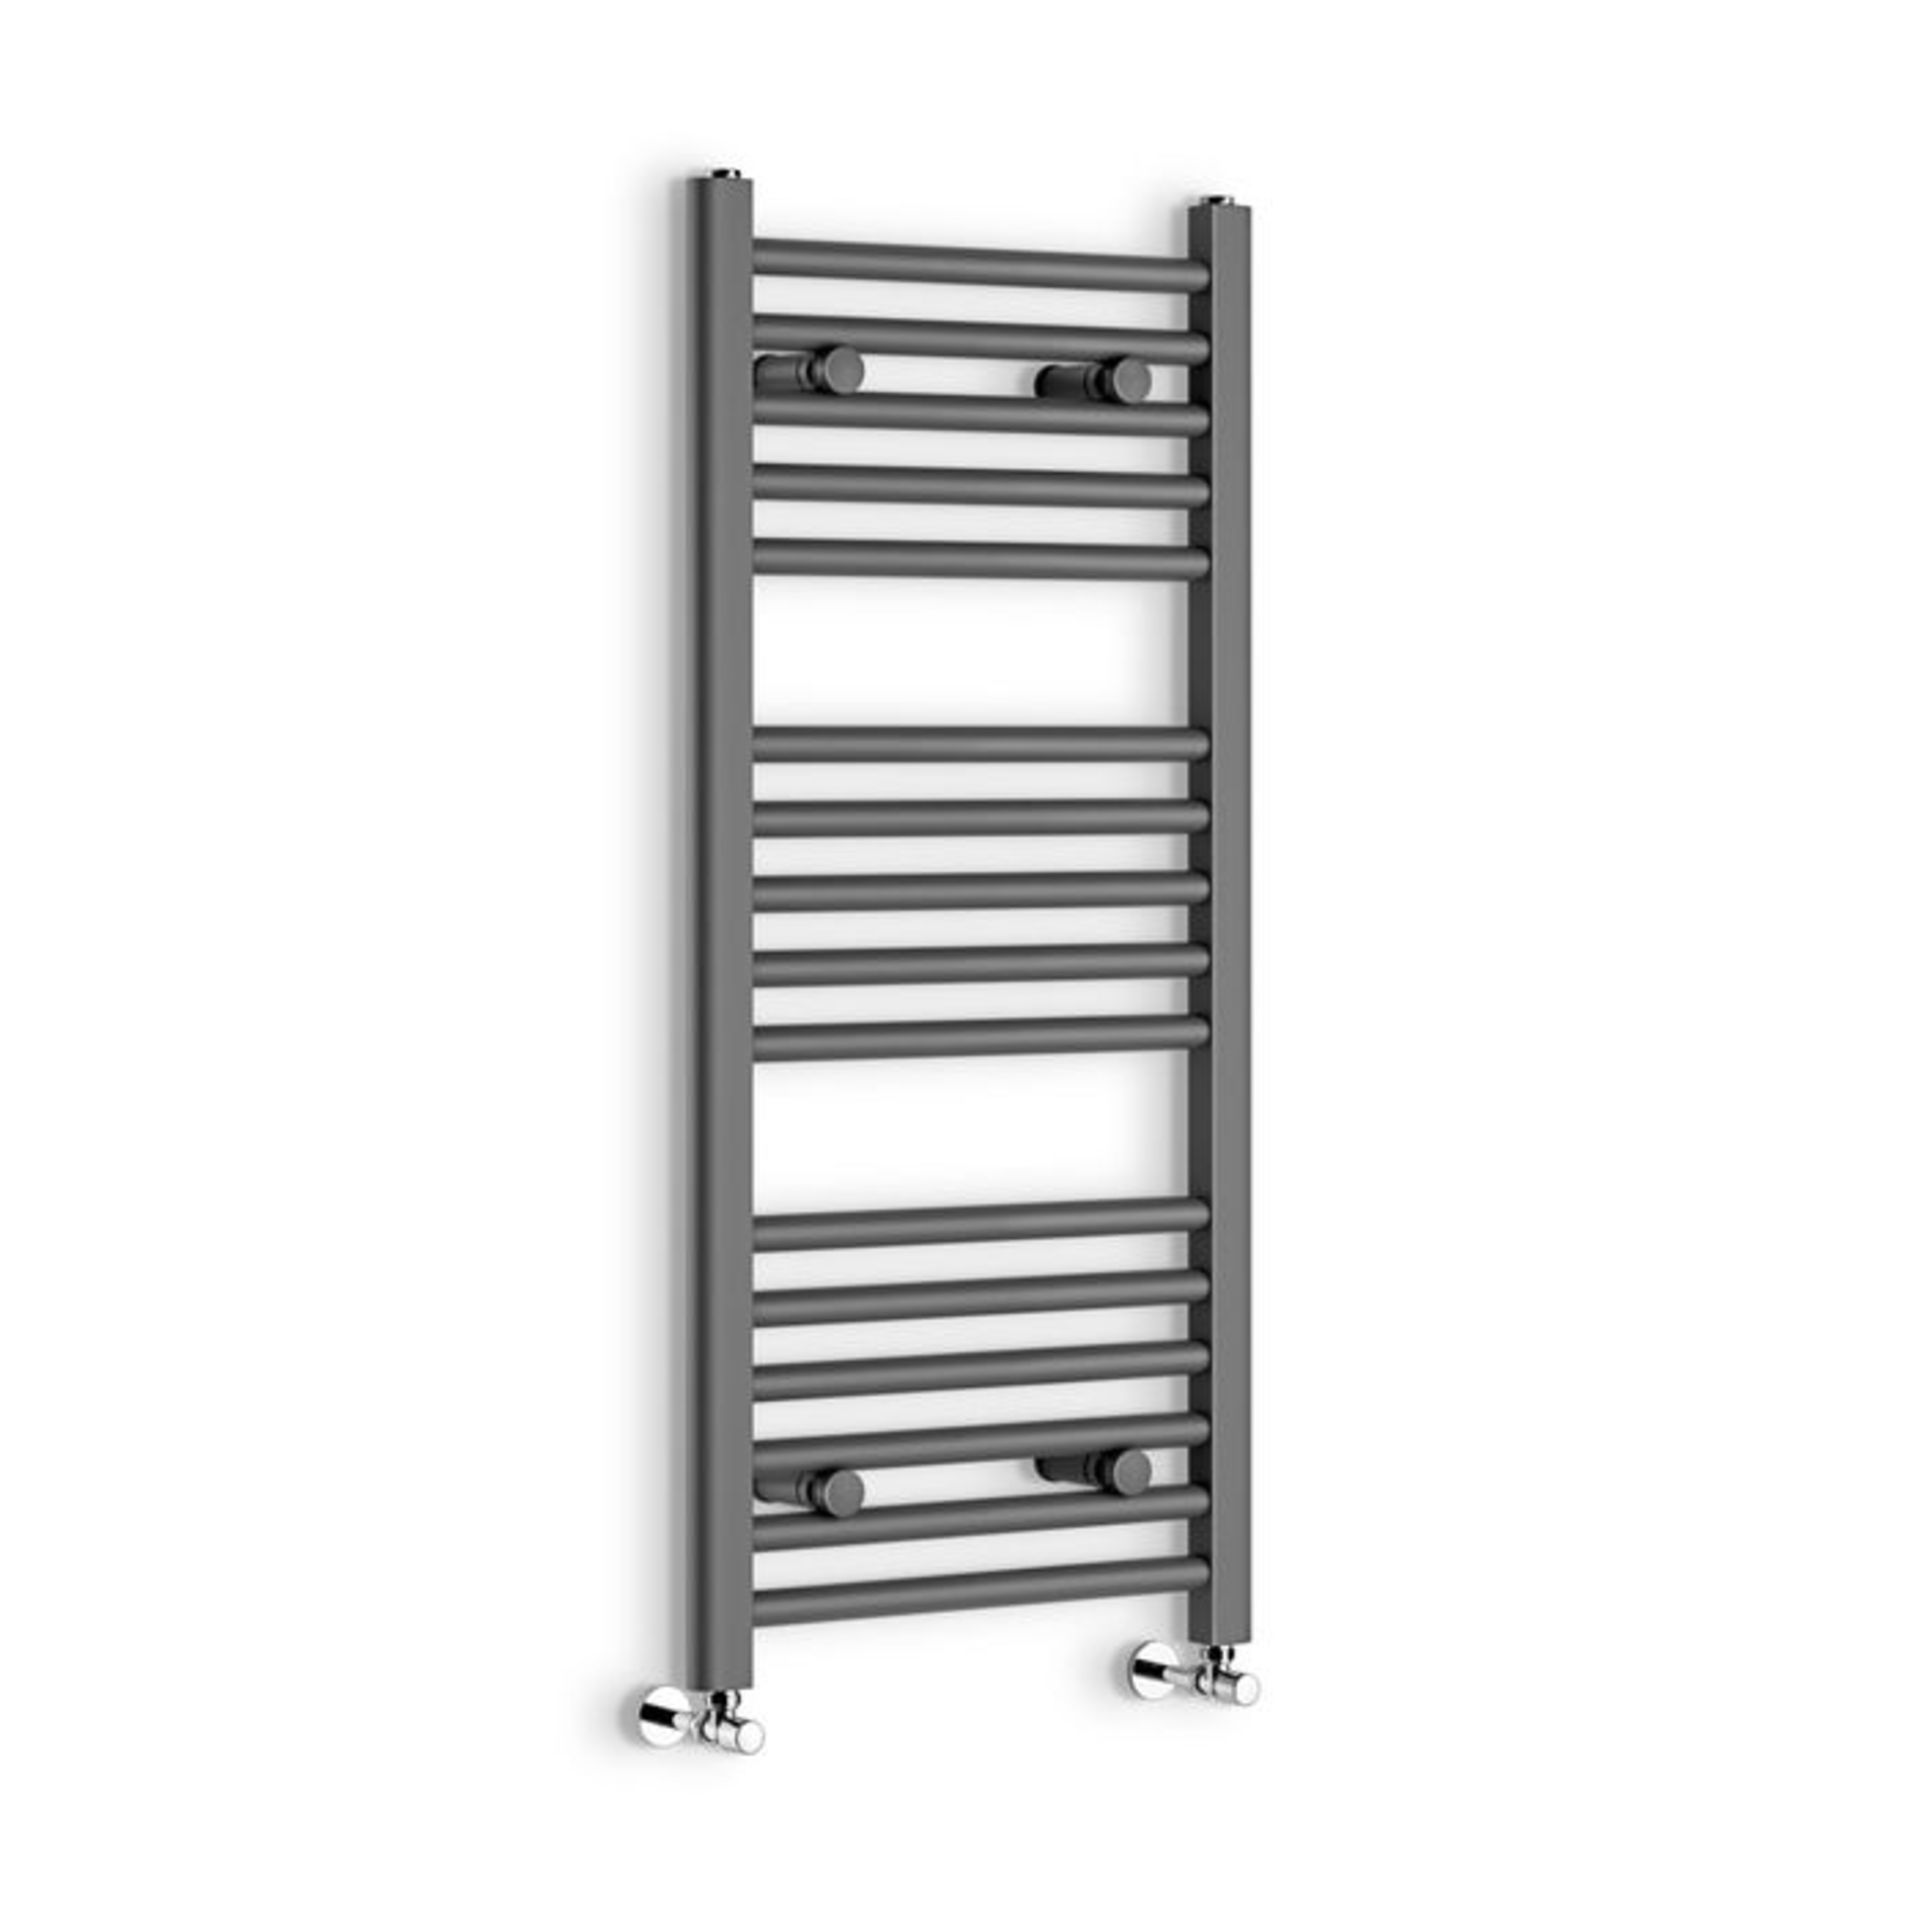 (NY169) 1000x450mm - 25mm Tubes - Anthracite Heated Straight Rail Ladder Towel Radiator. This - Image 3 of 3